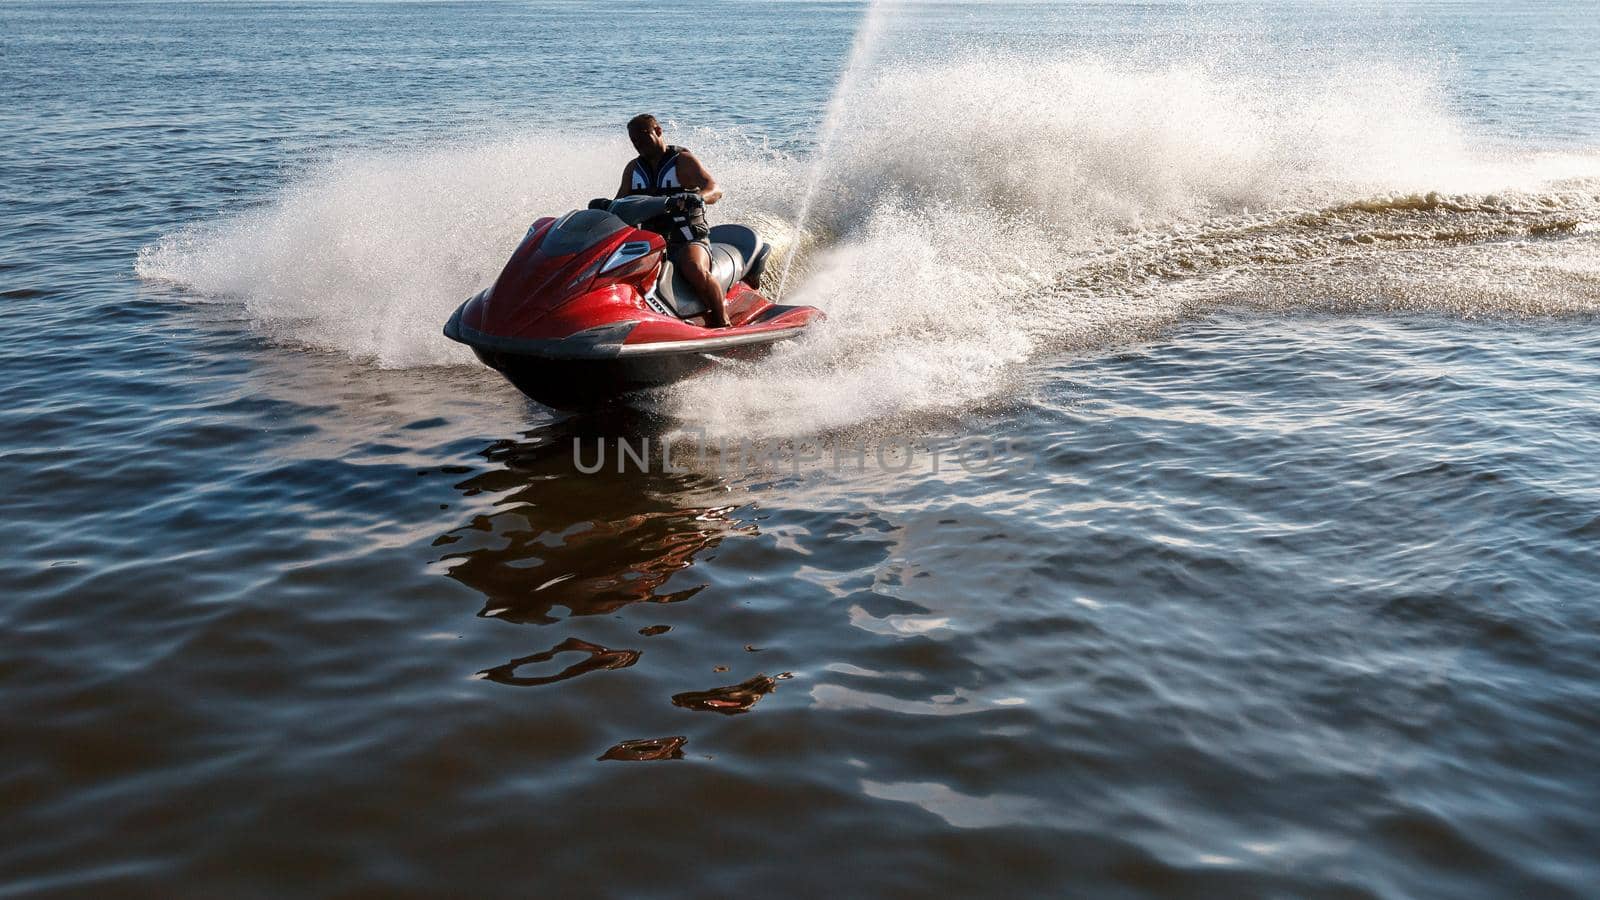 Man drives red jet ski on turquoise sea on a blue day